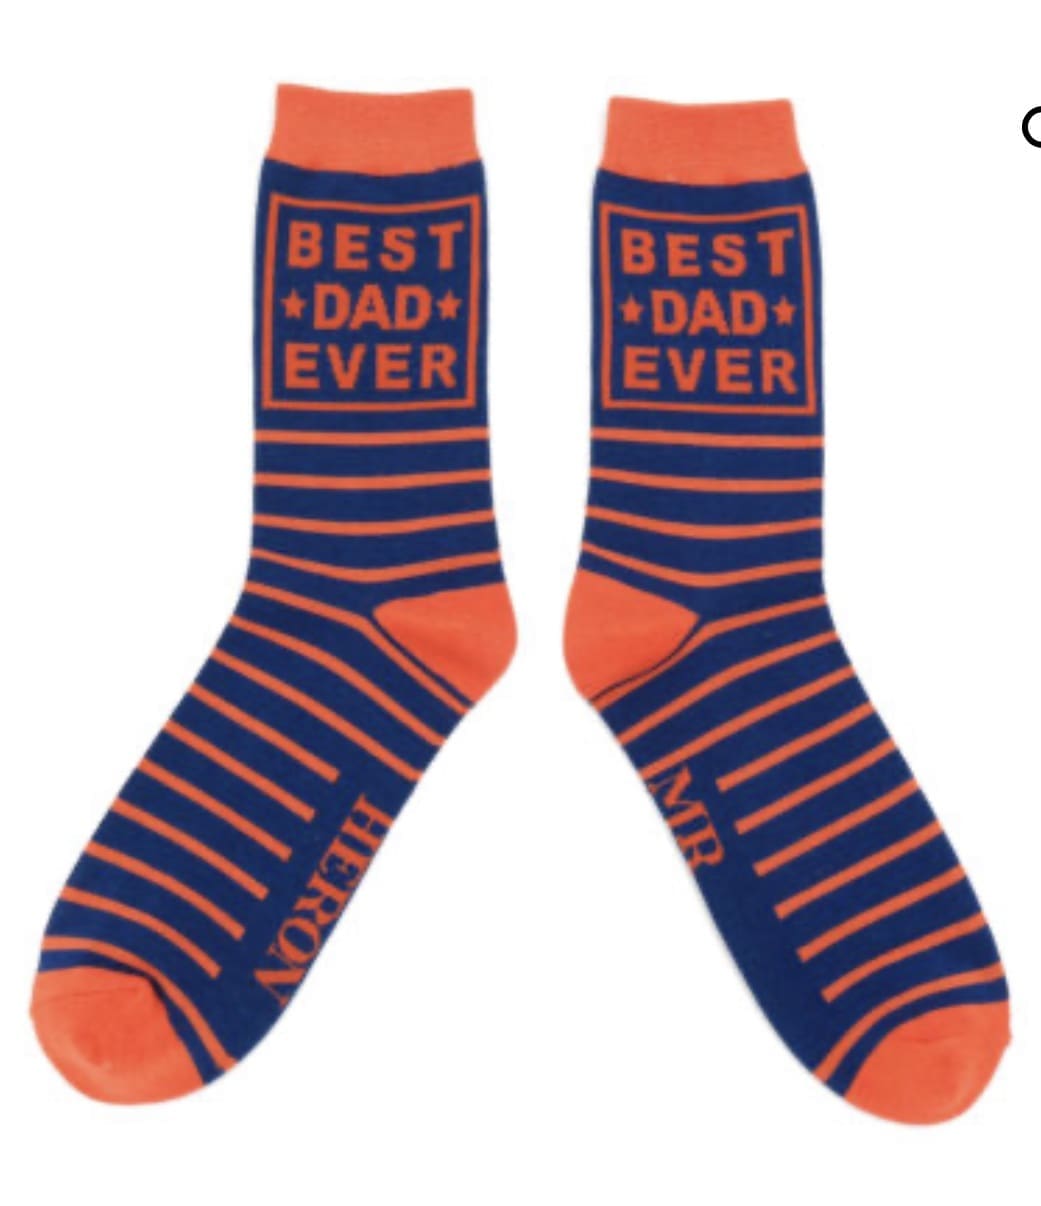 A pair of socks that say best dad ever.